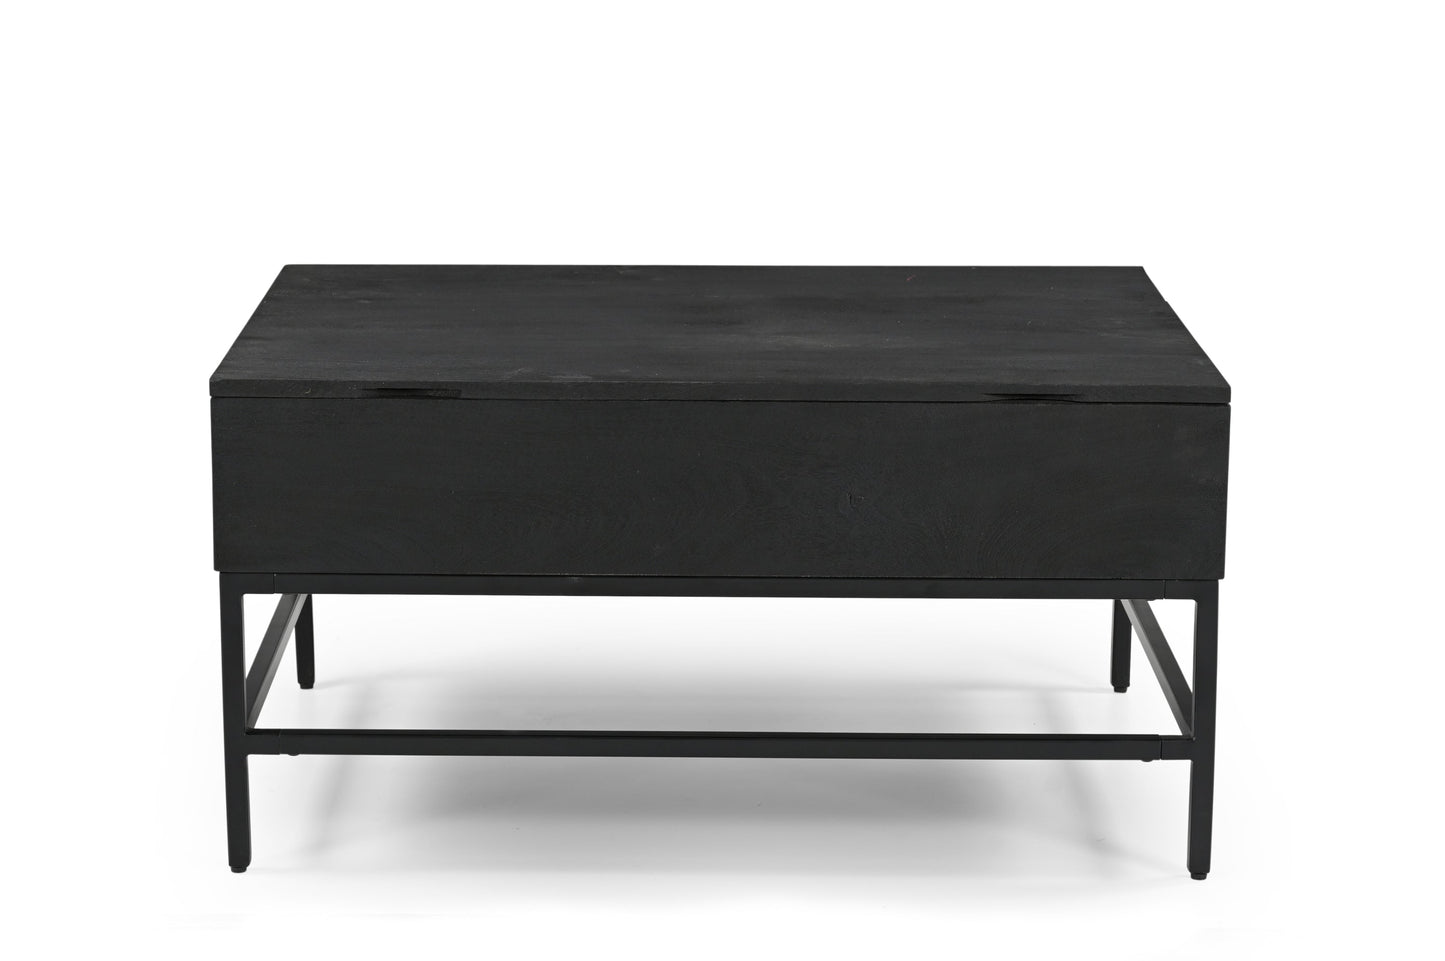 T1105-05 Black Lift Top Coffee Table